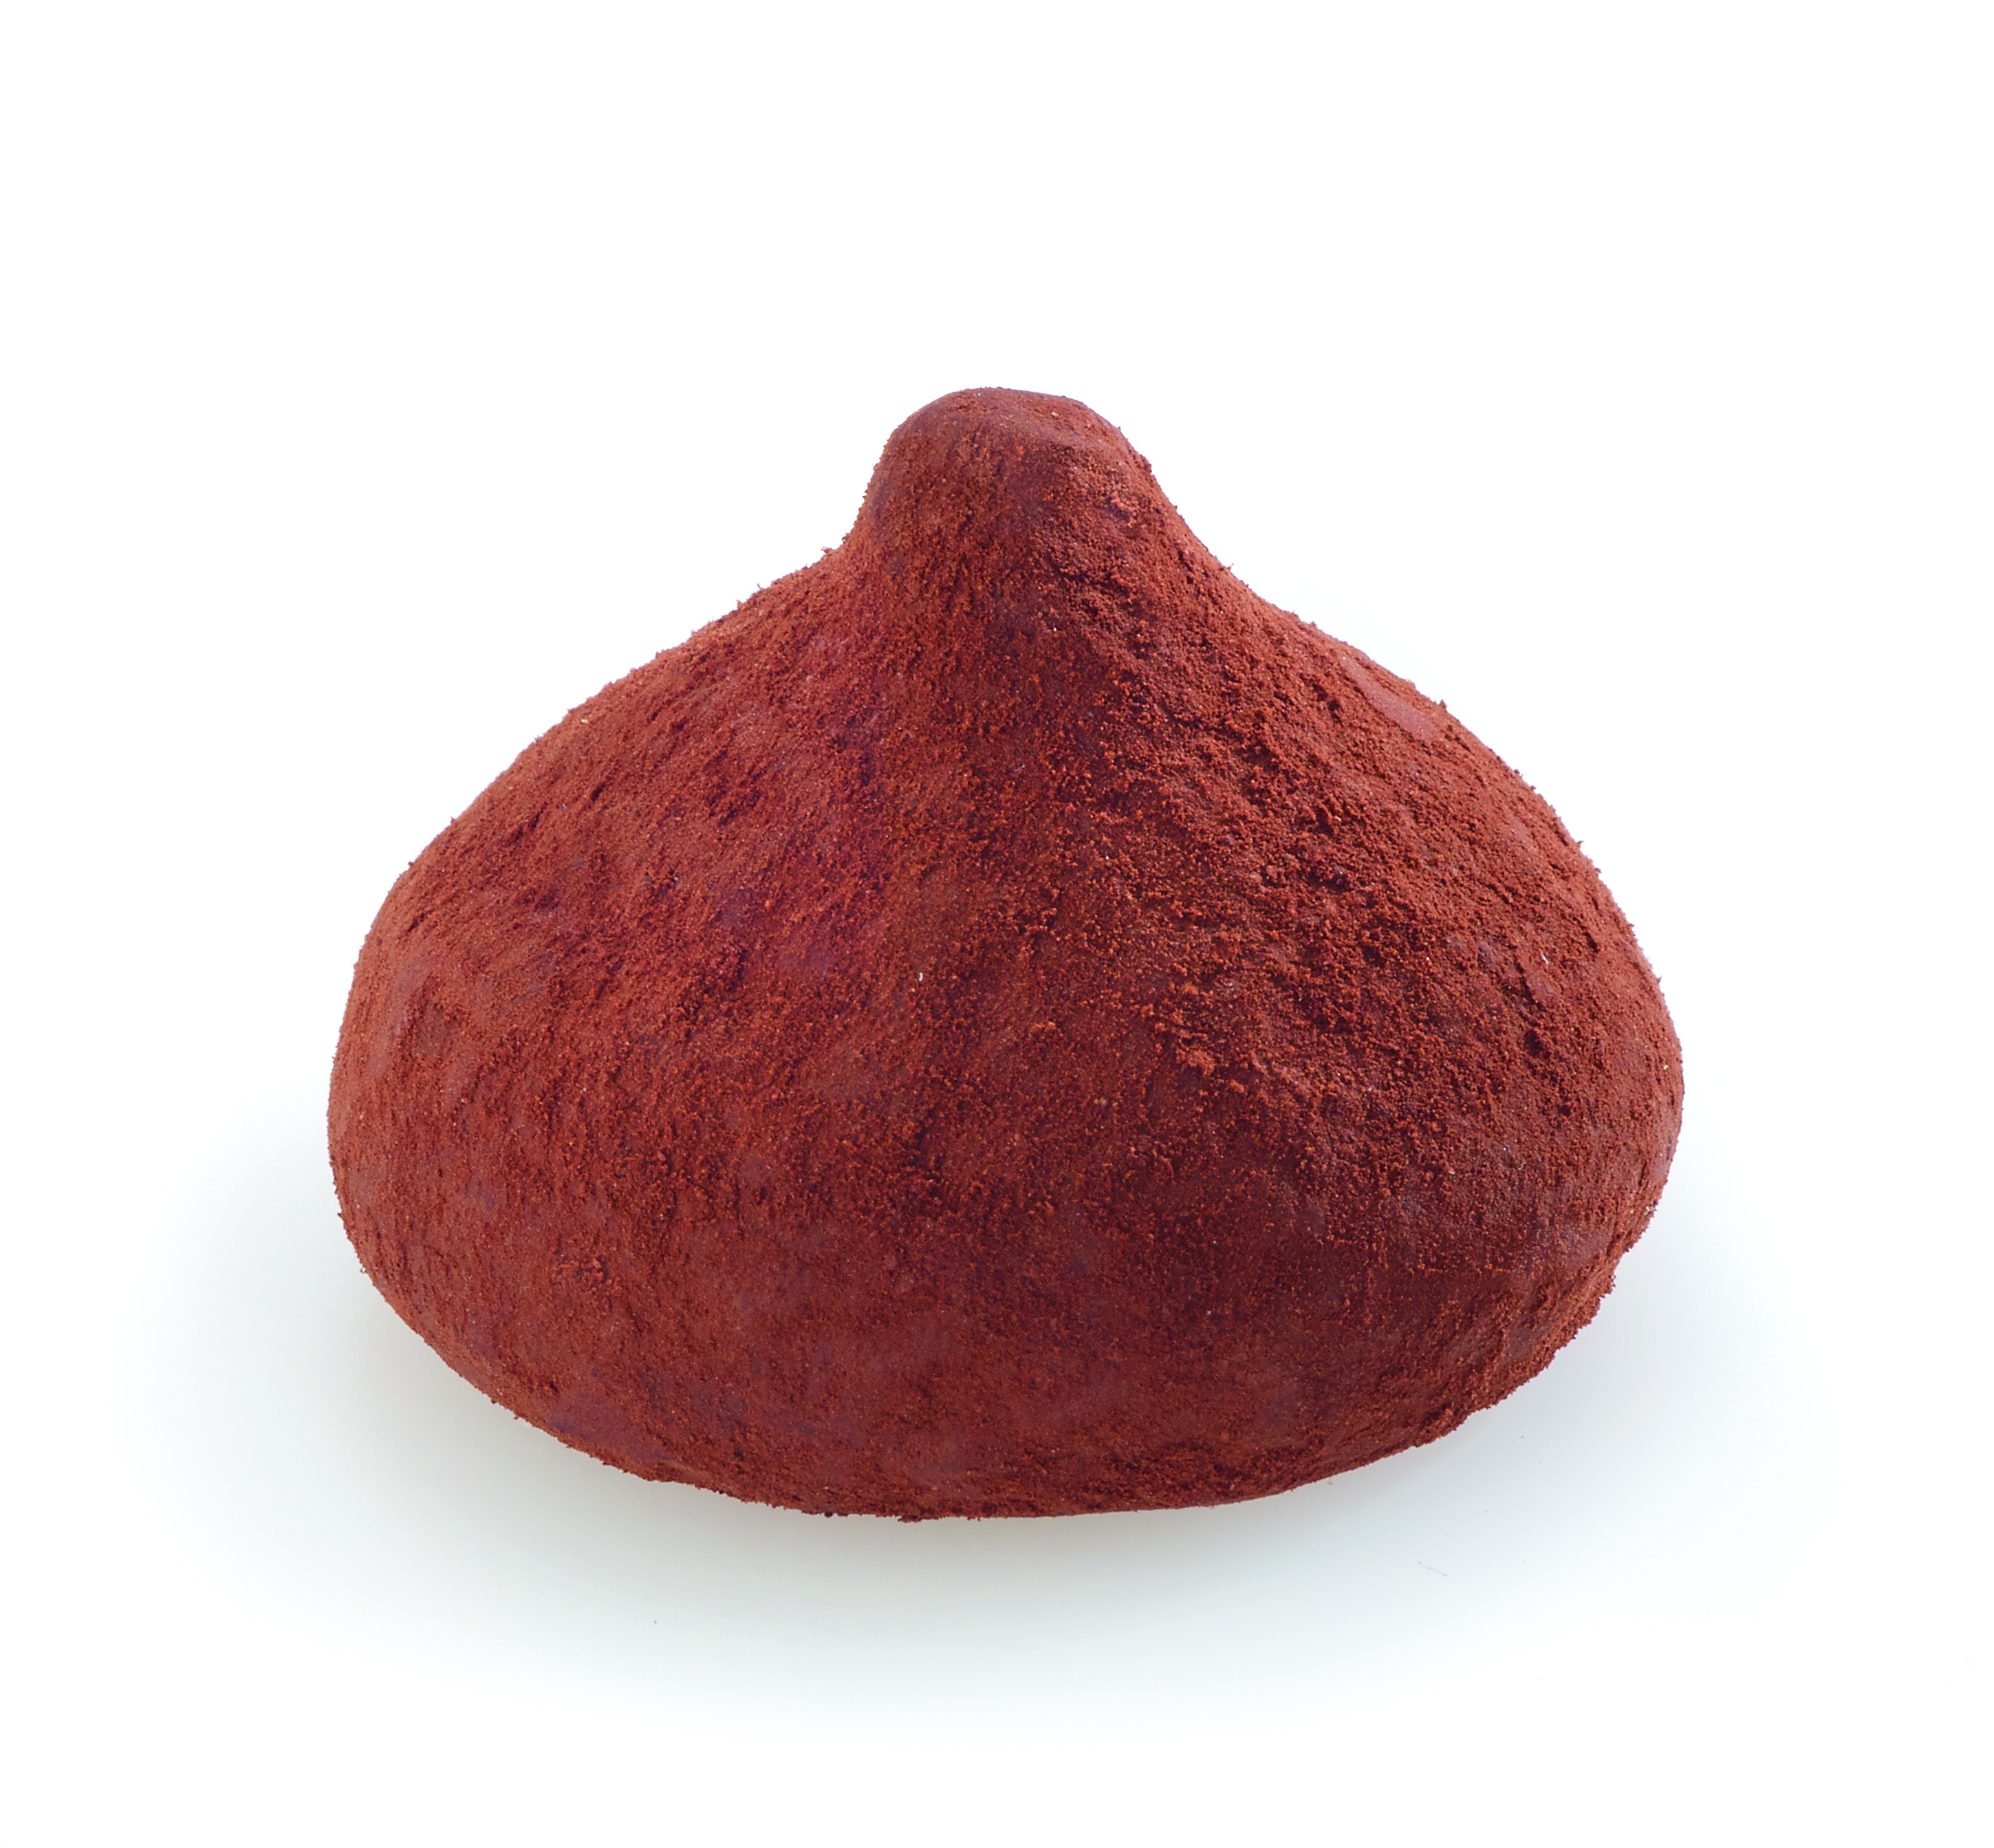 Lemaître 90% sugar-reduced cocoa dusted truffle